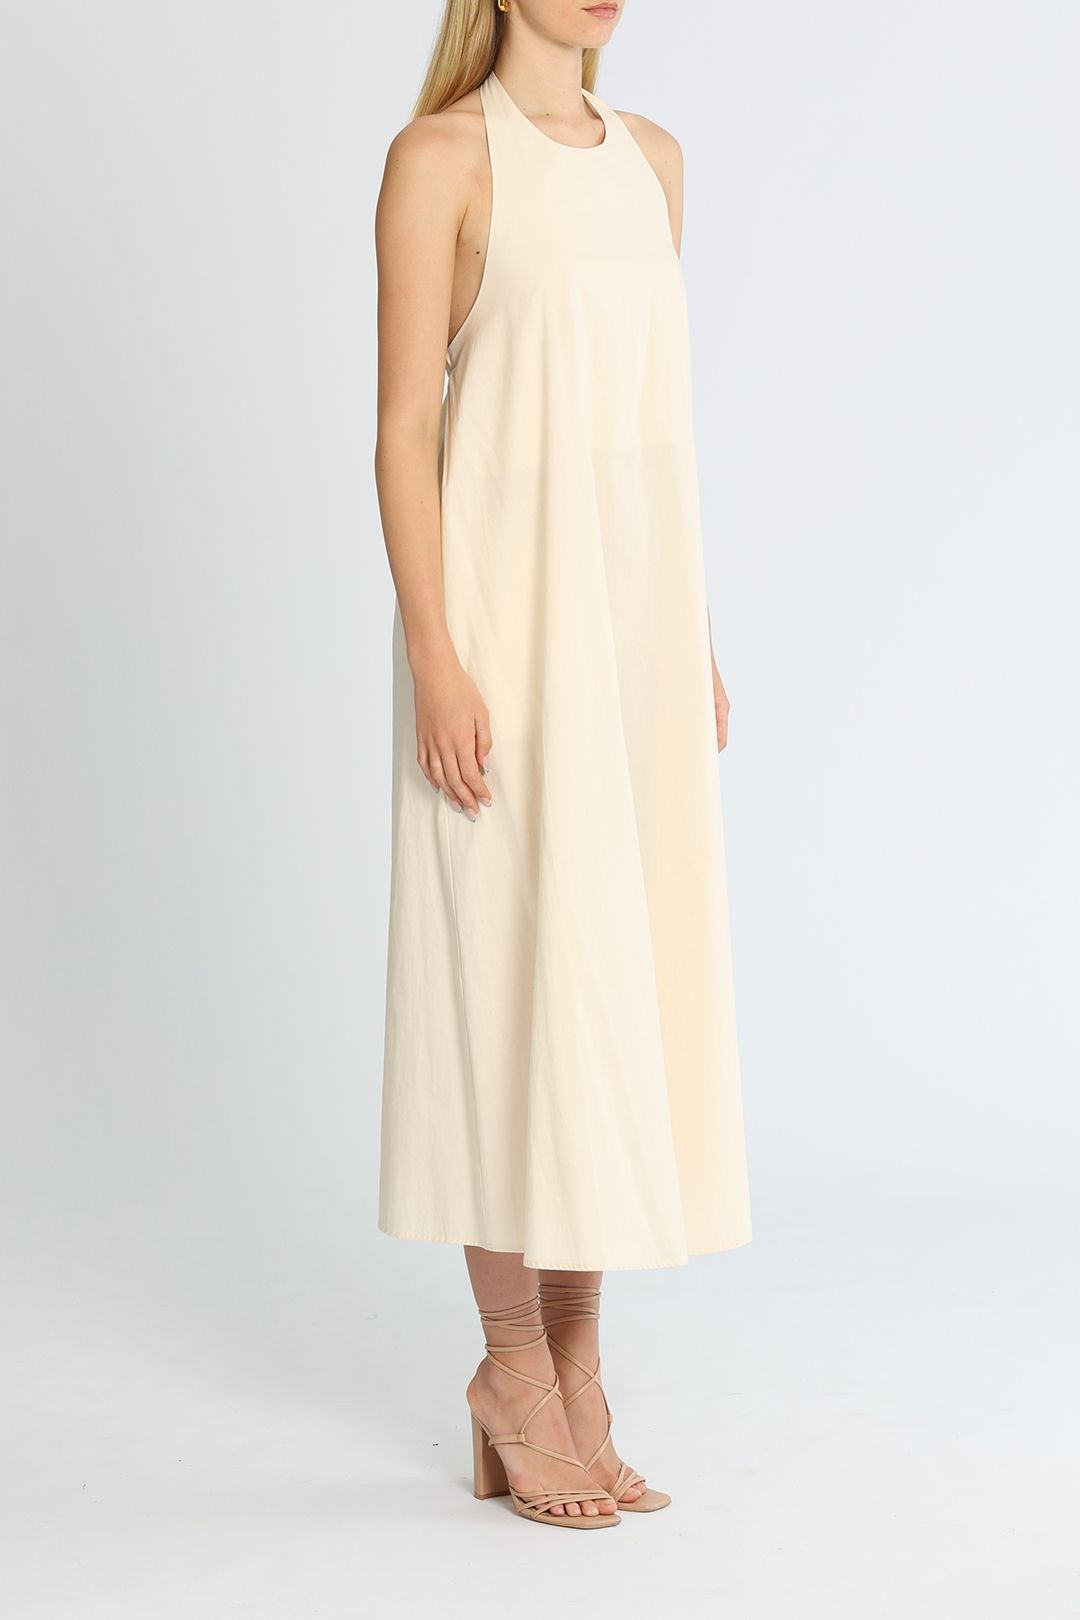 Blanca Lilybel Dress Cream Relaxed Fit